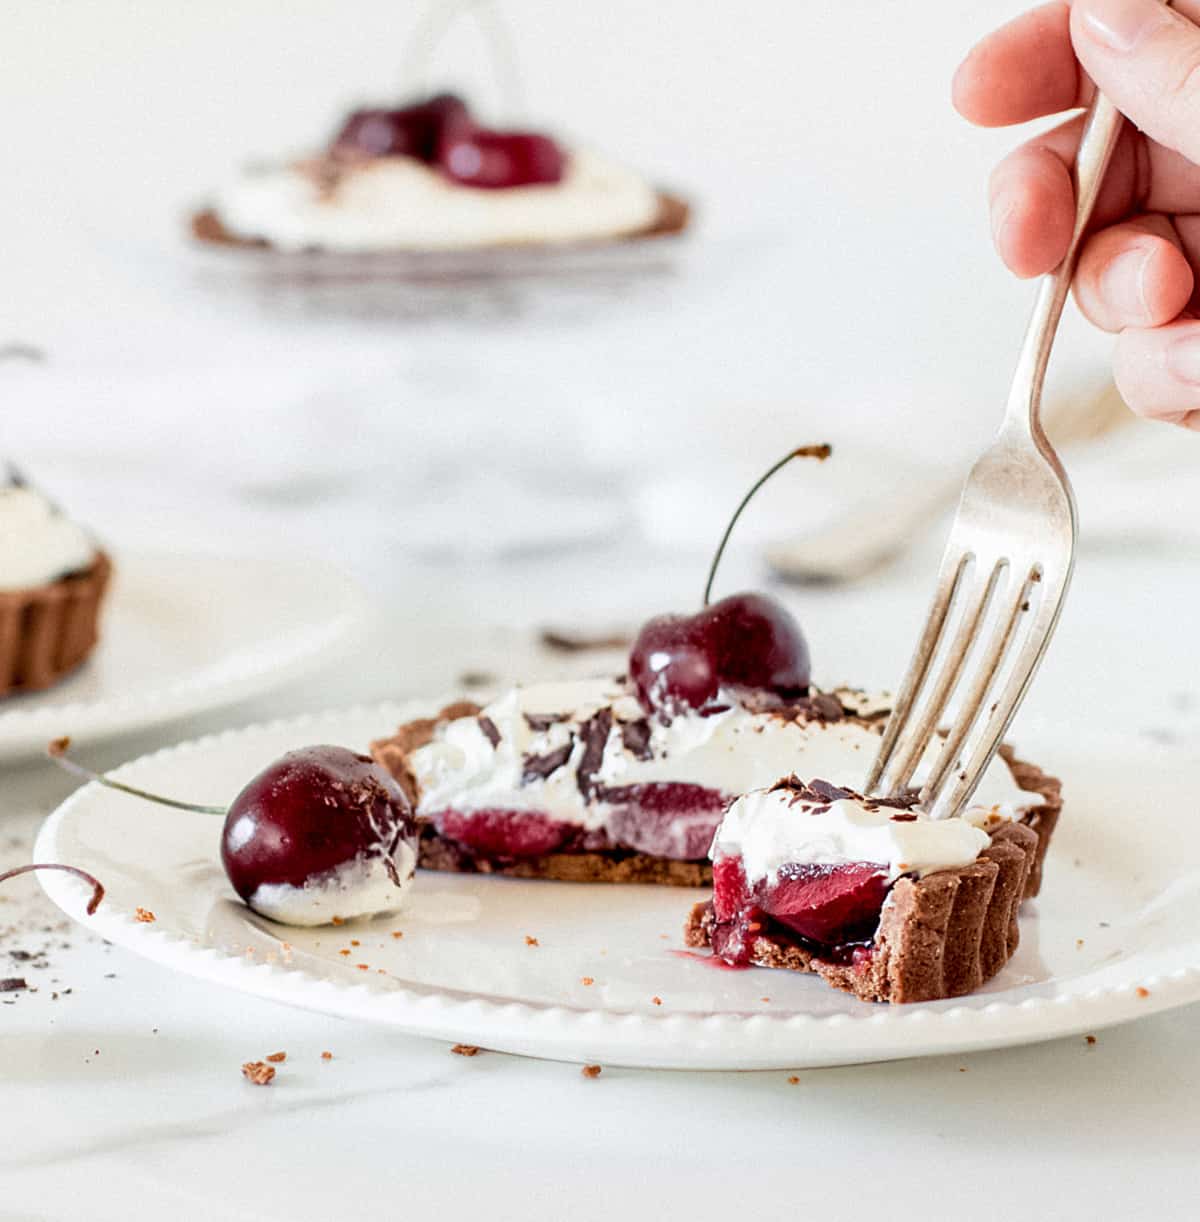 Hand forking piece of chocolate, cherry and cream tartlet, white background, more individual tarts